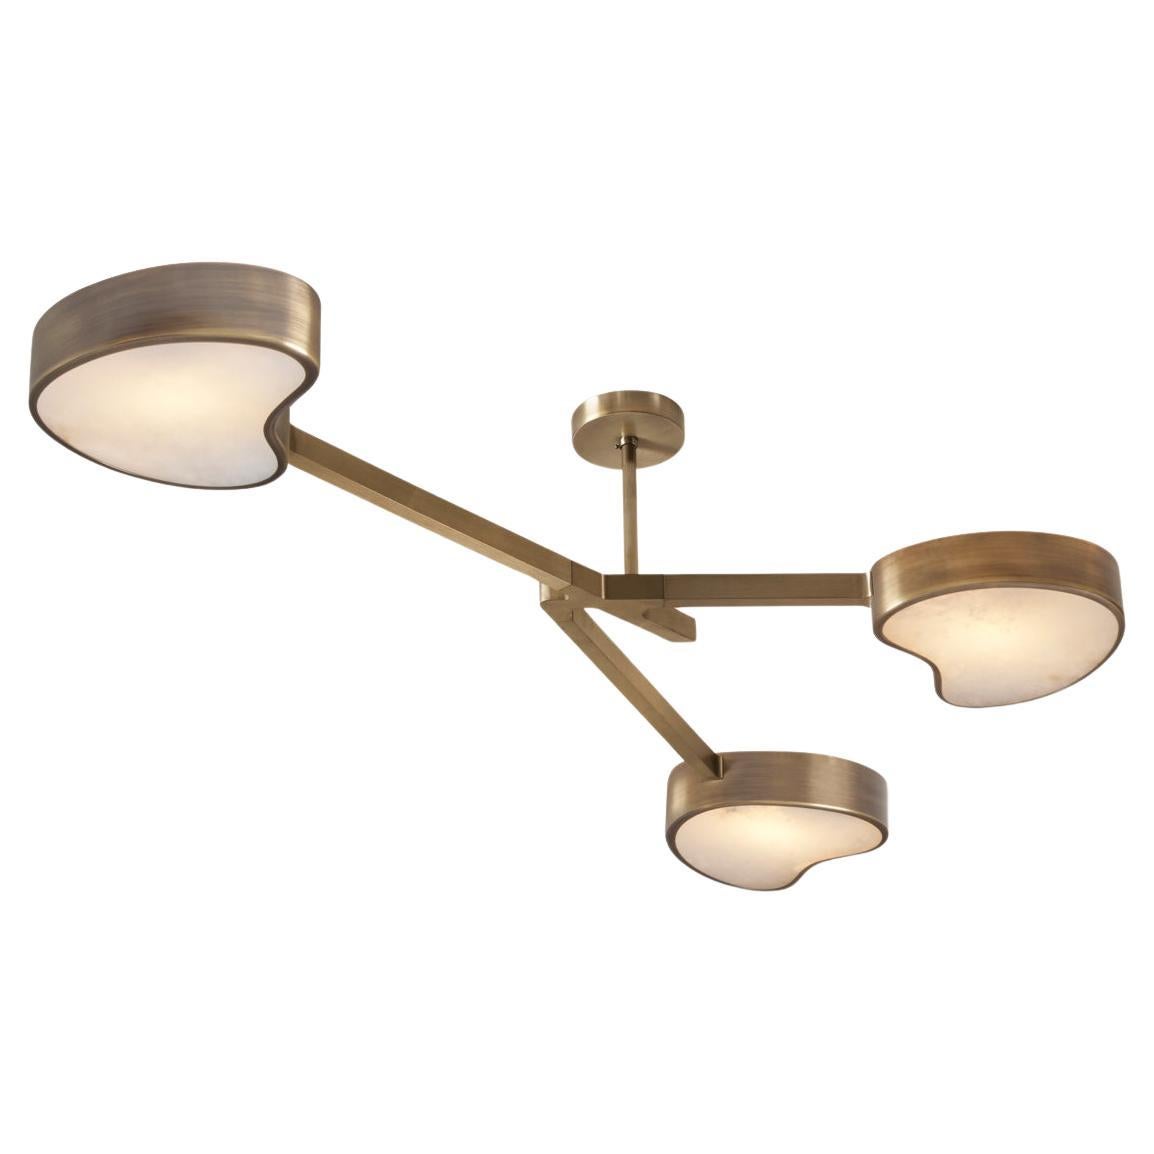 Cuore N.3 Ceiling Light by Gaspare Asaro. Bronze Finish